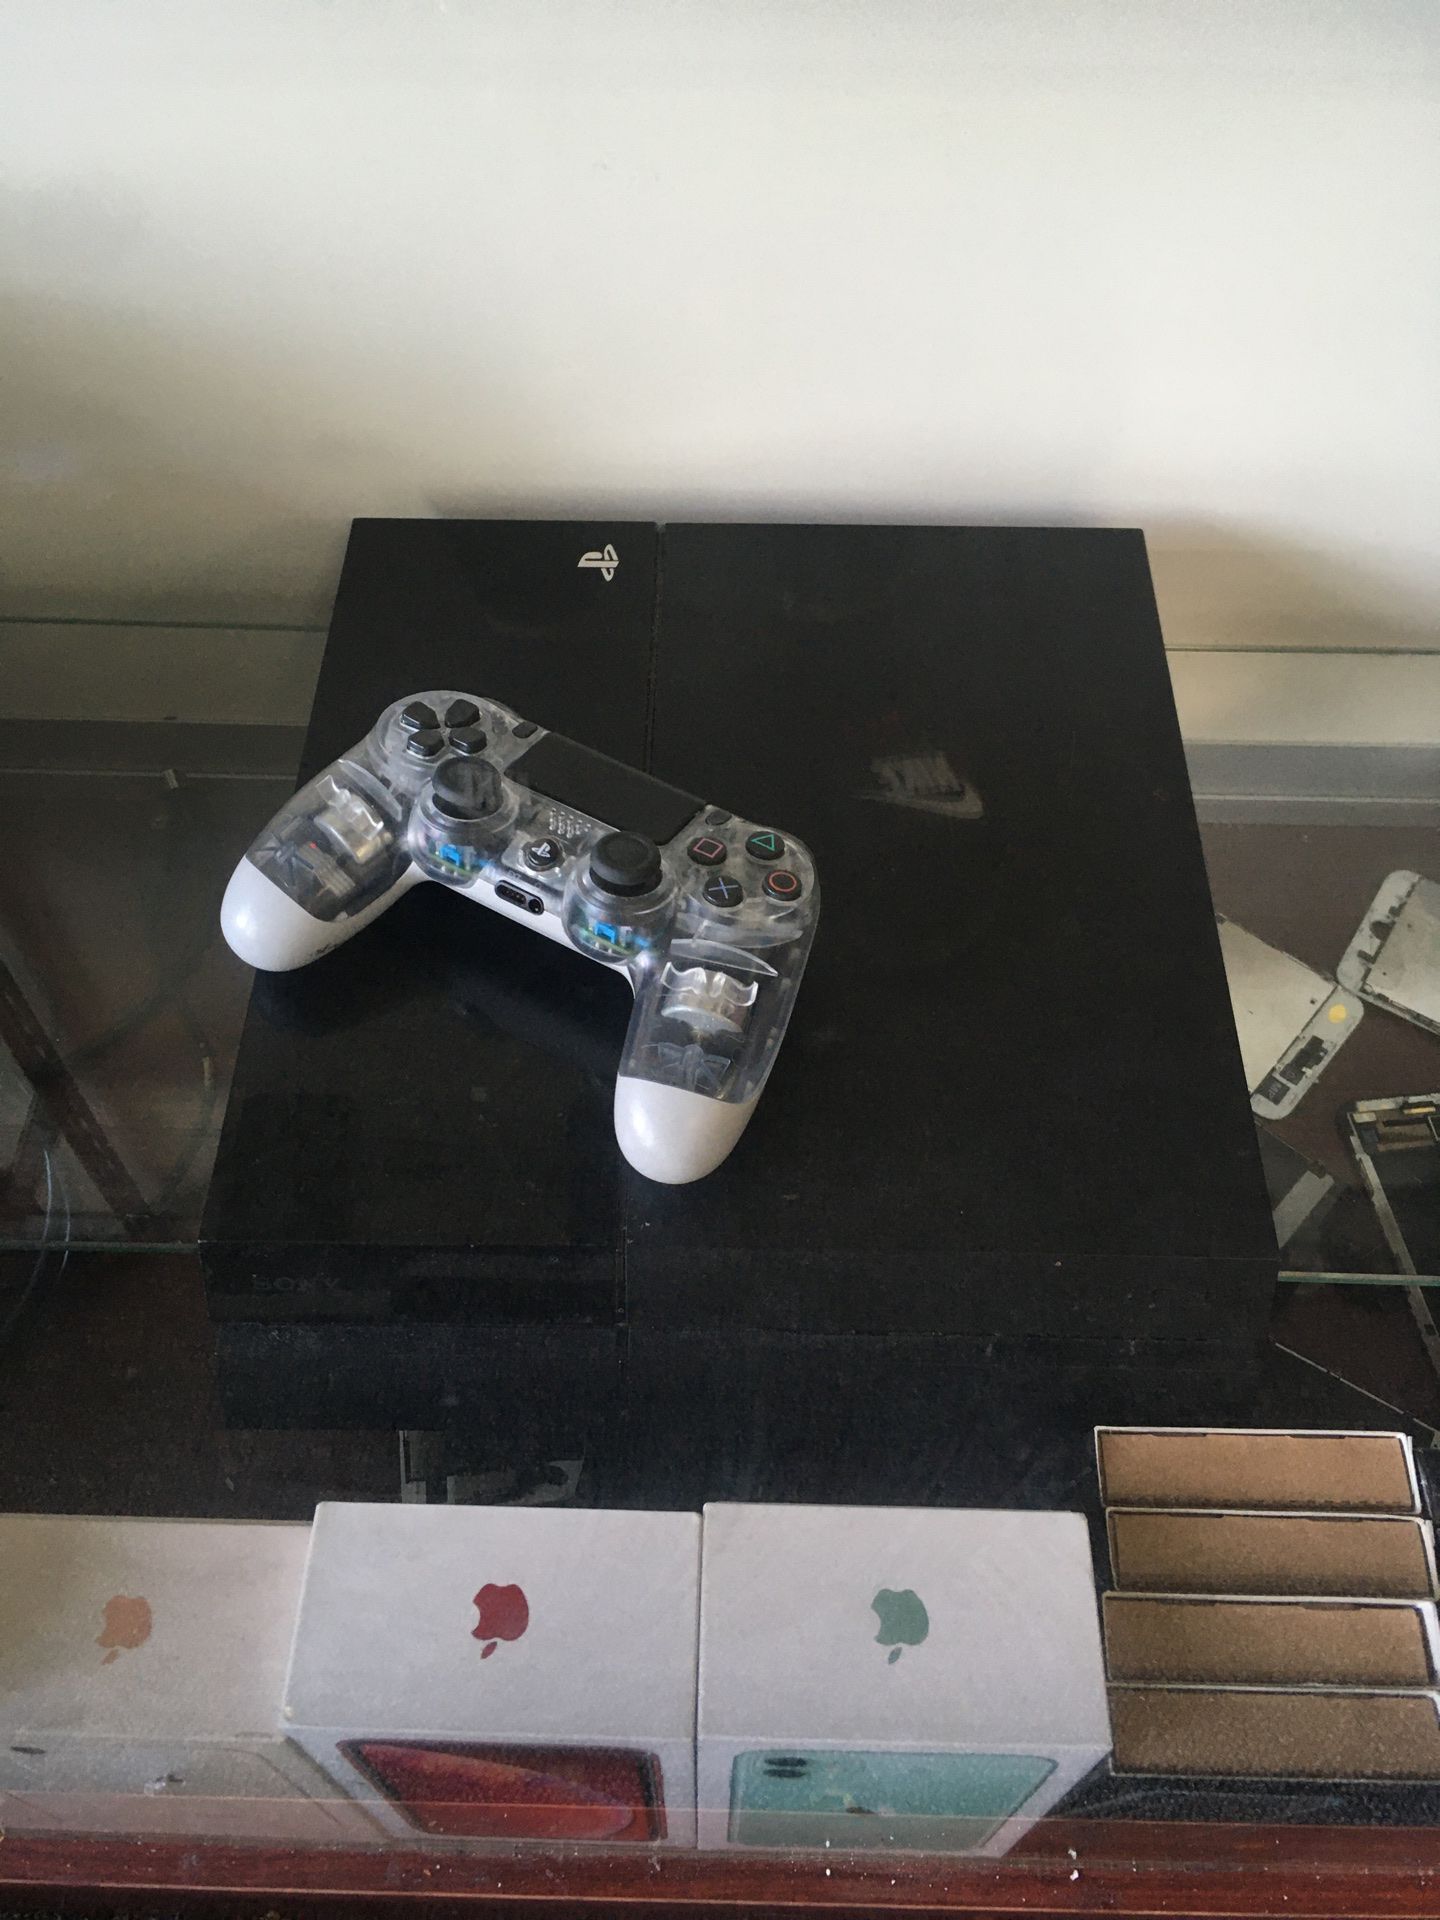 Ps4 with 1 controller and cords